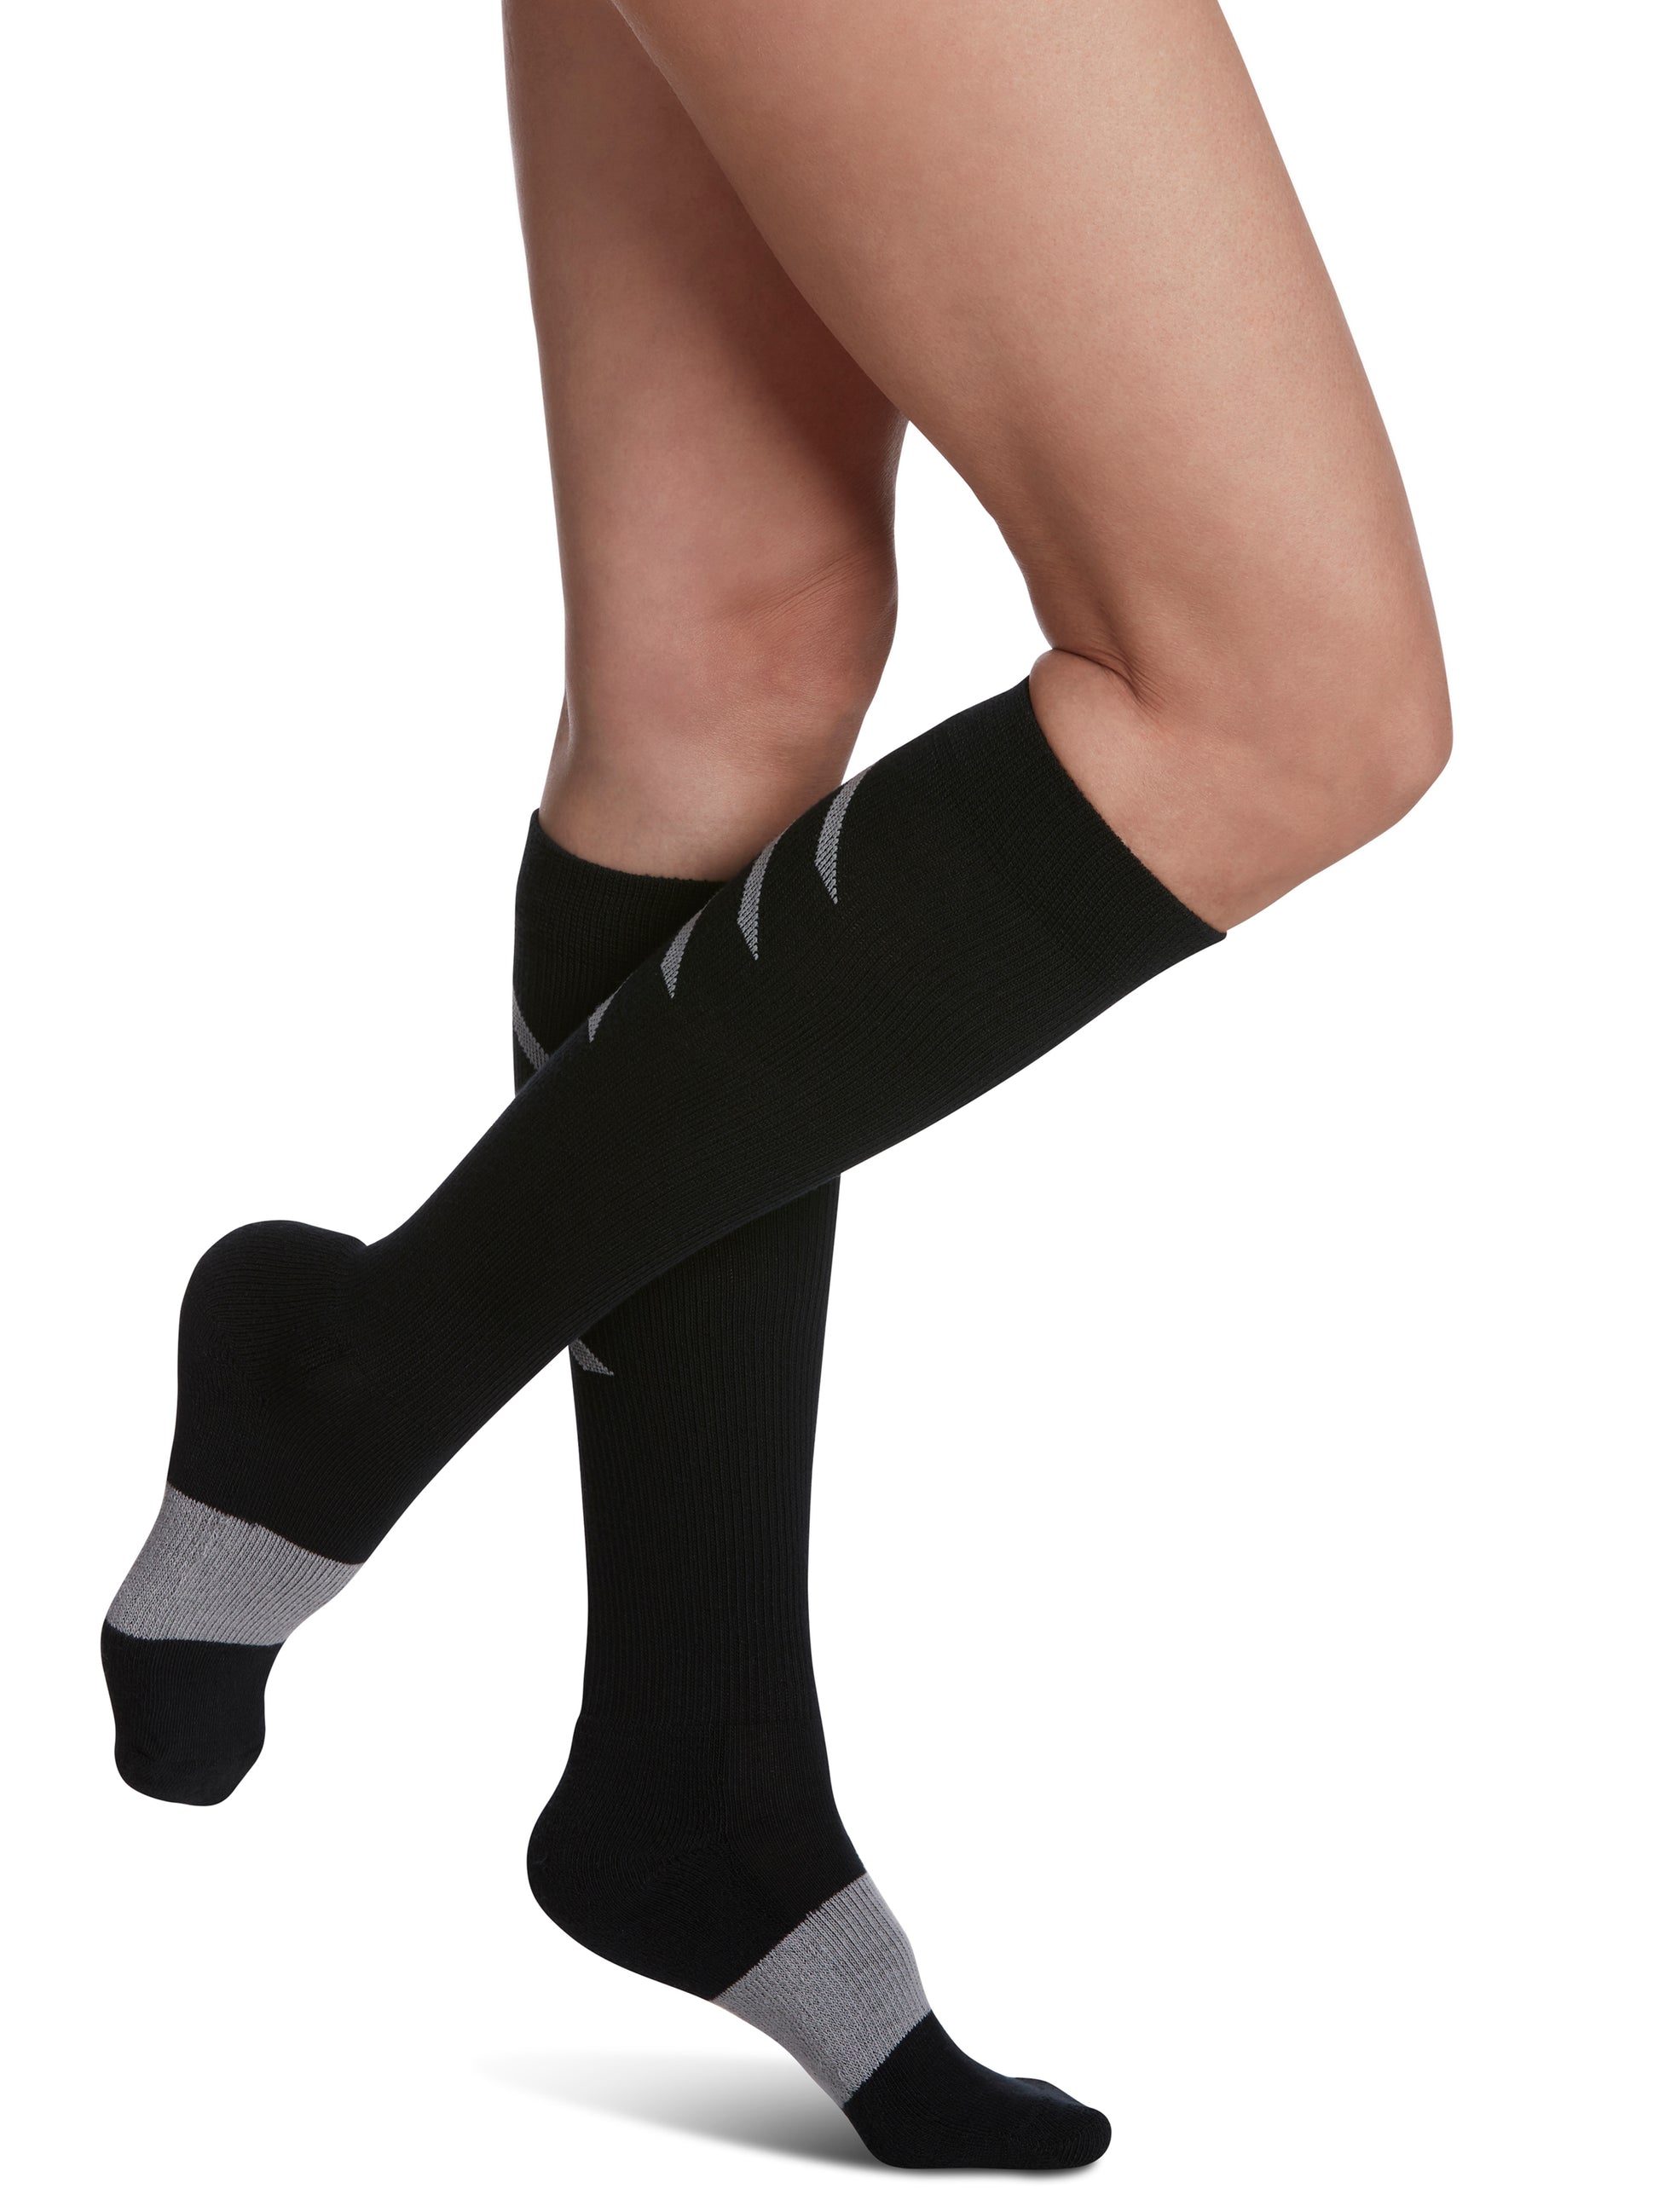 Women's Athletic Recovery Calf Sock